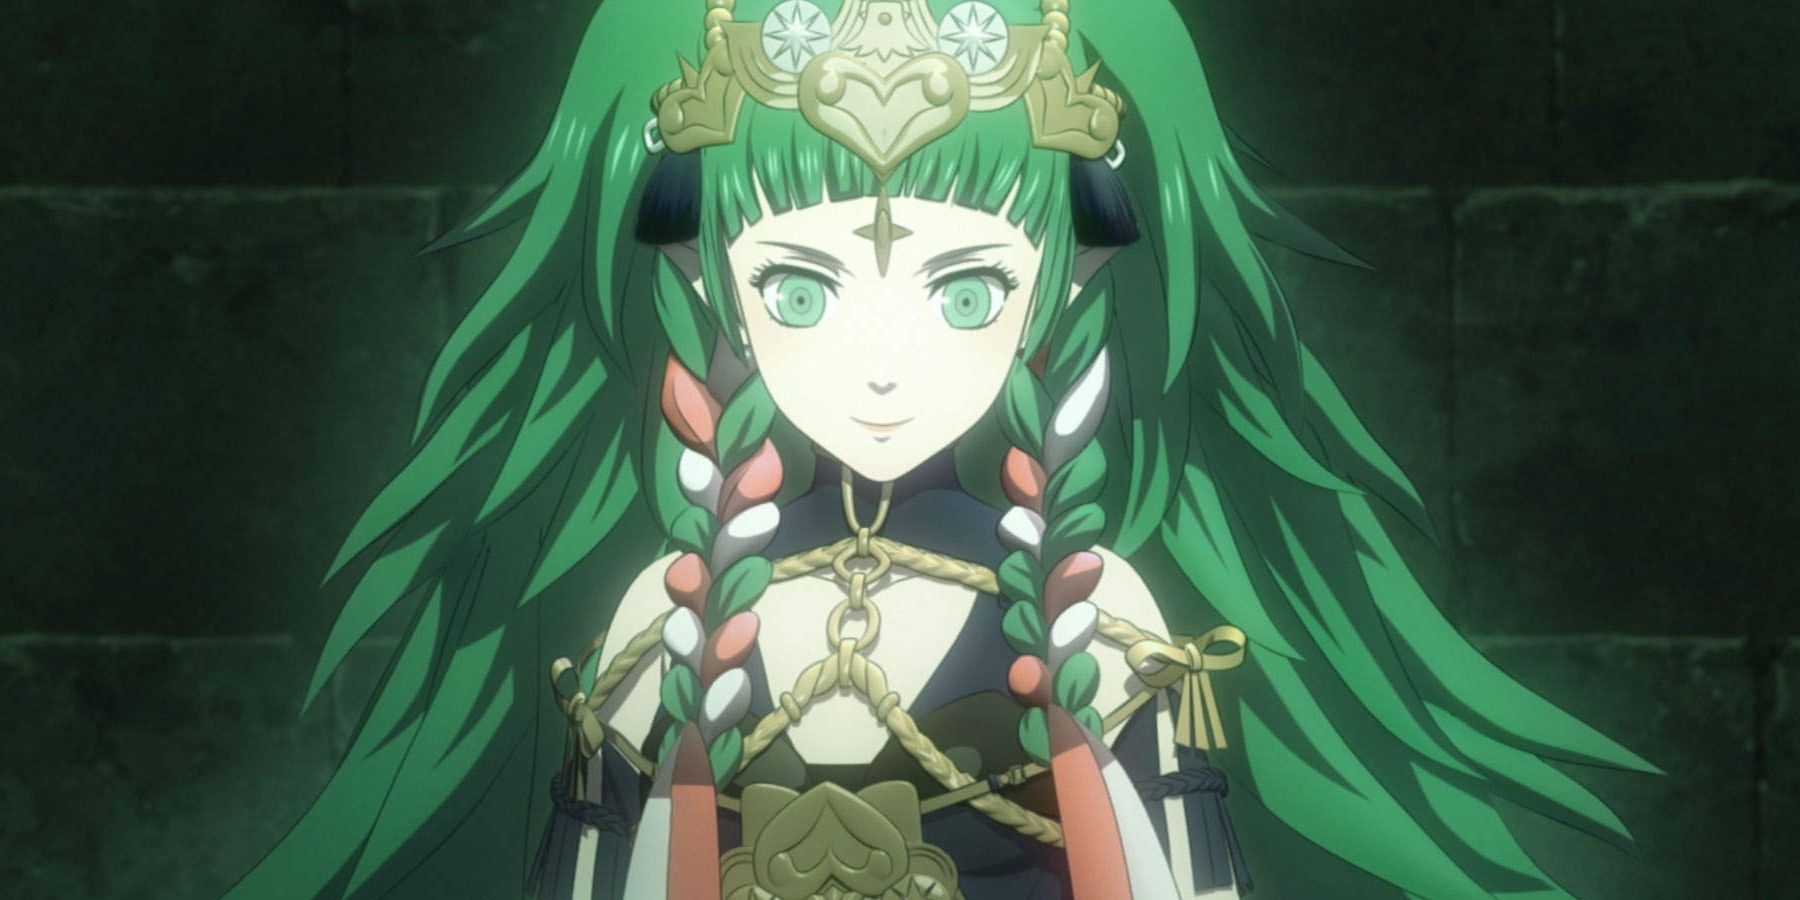 Fire Emblem: Three Houses Was Inspired by Real-World History and Mythology